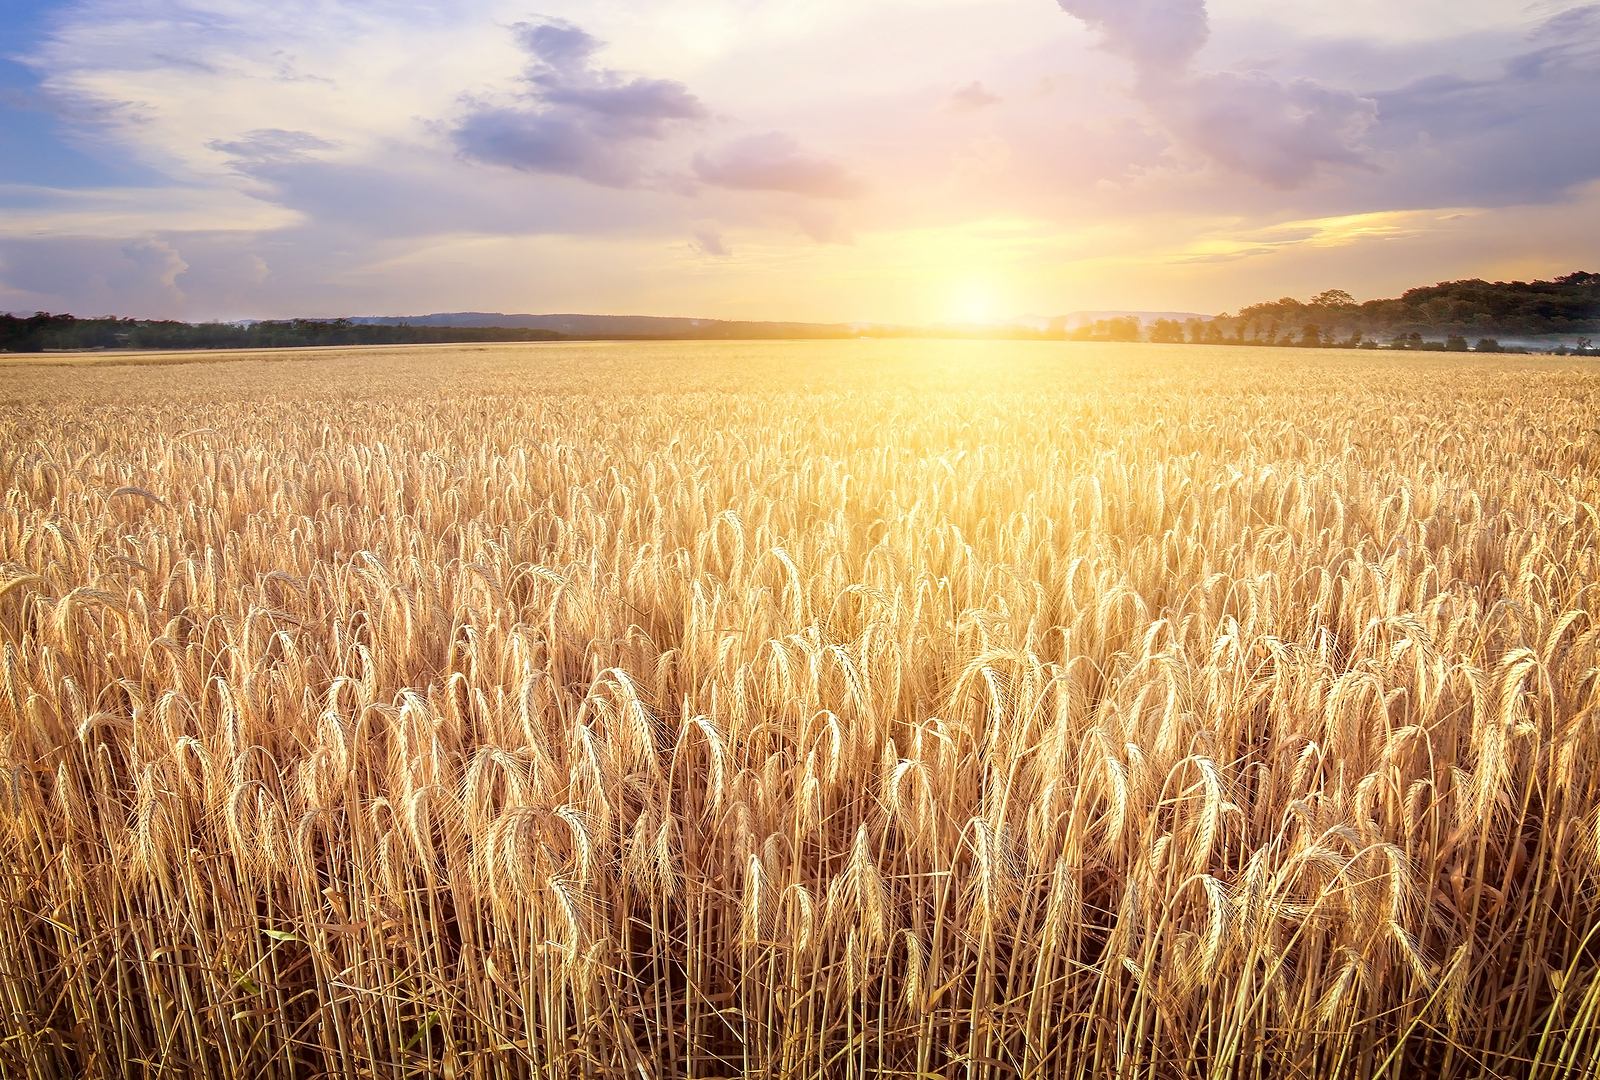 Nutrients and fiber are lost during the processing of wheat.